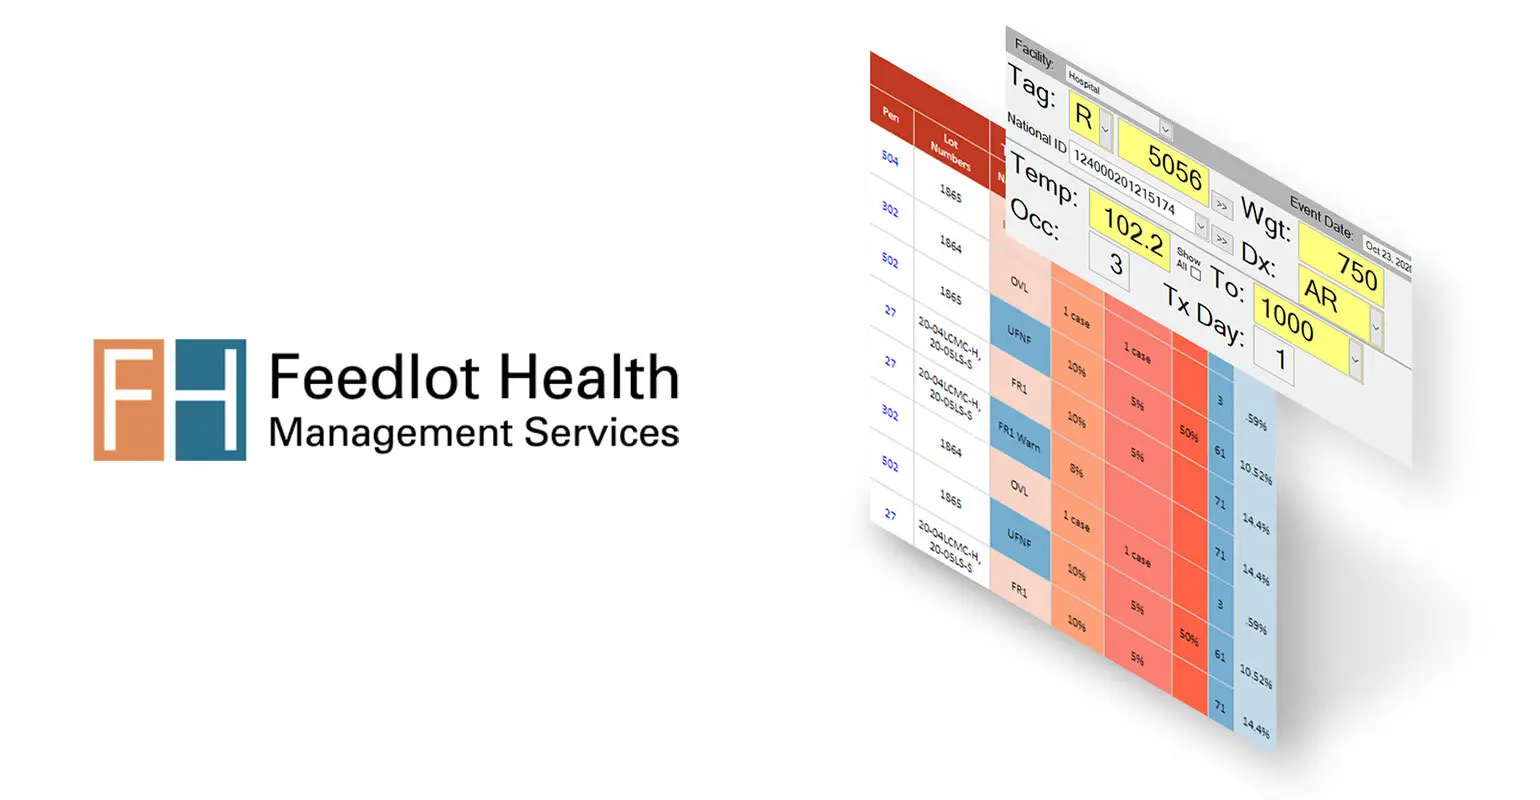 Image showing Feedlot Health logo and software.